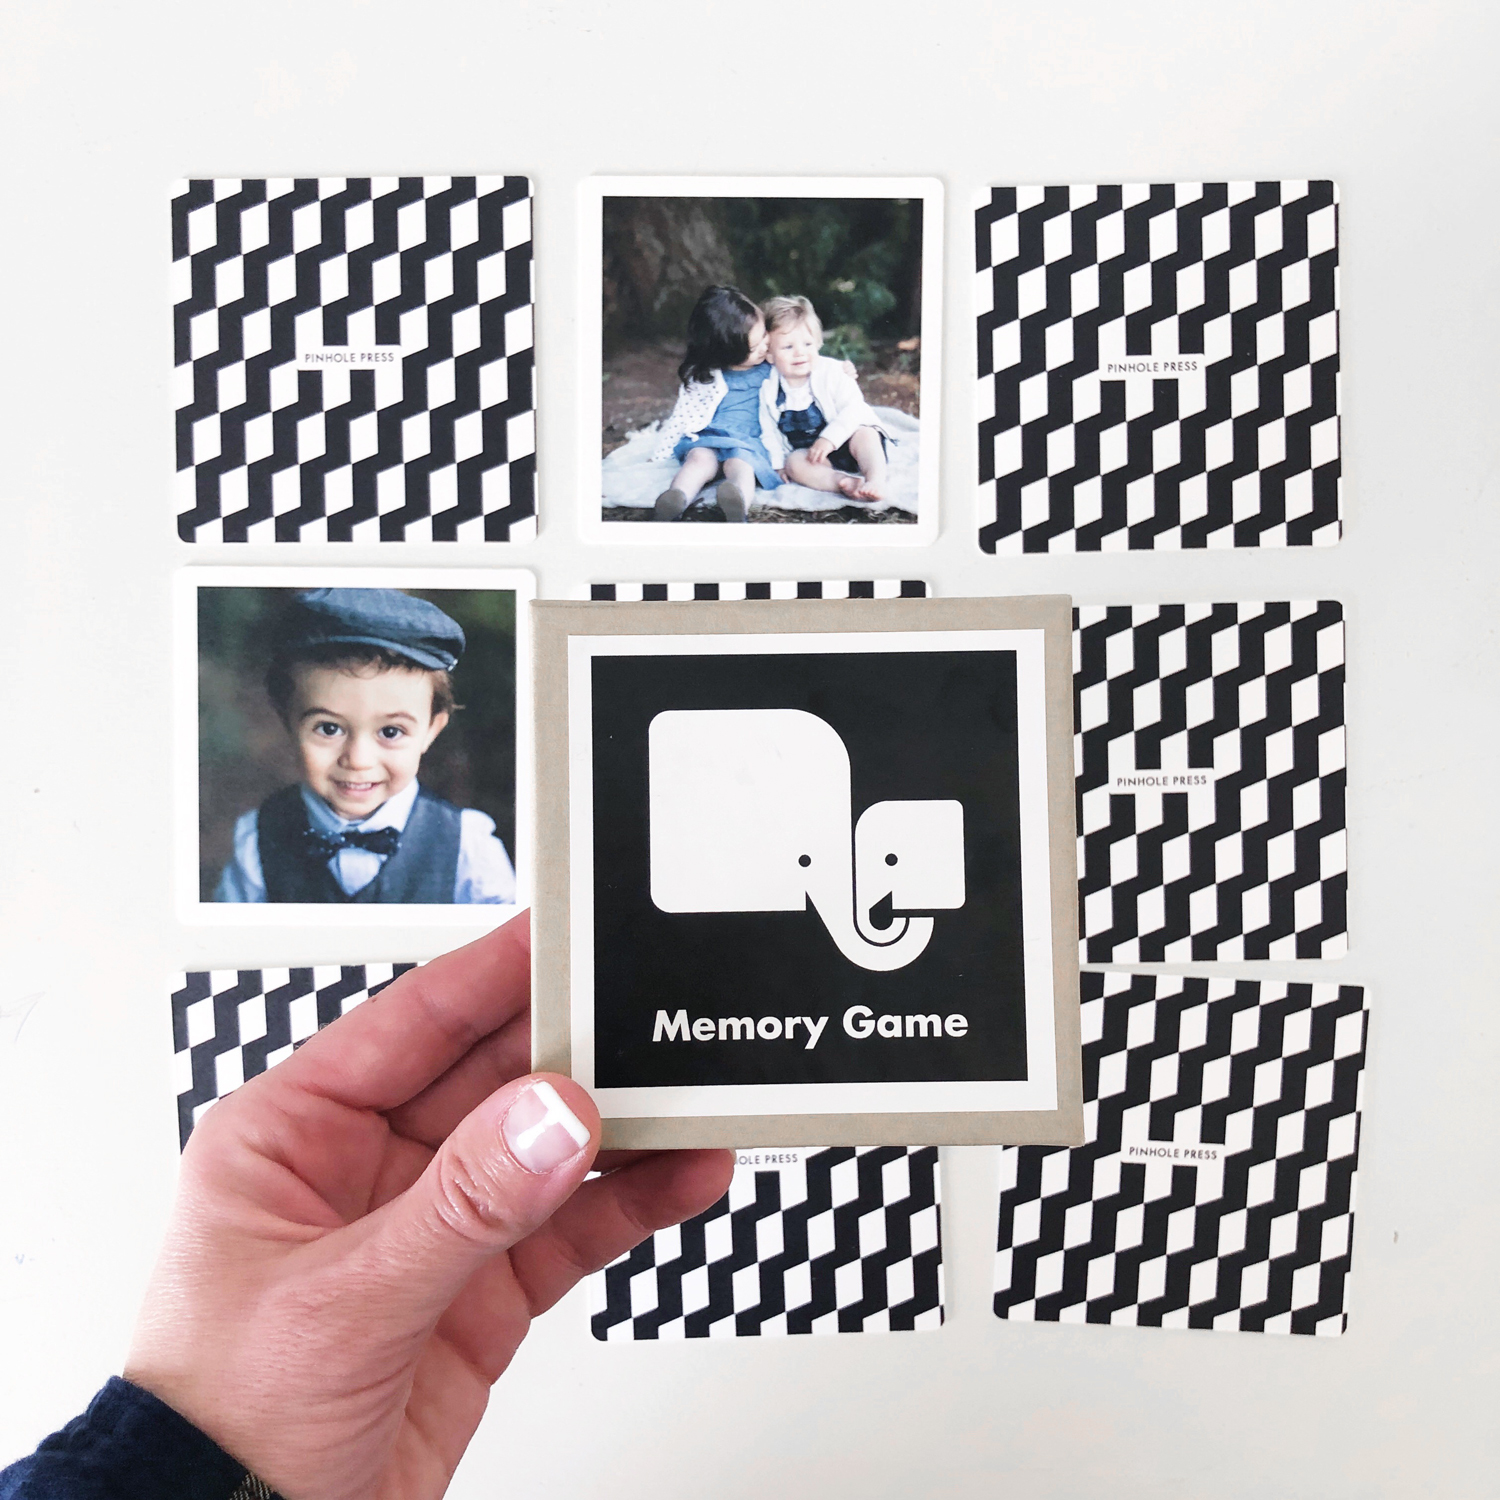 love these cute photo gifts for kids from pinhole press!